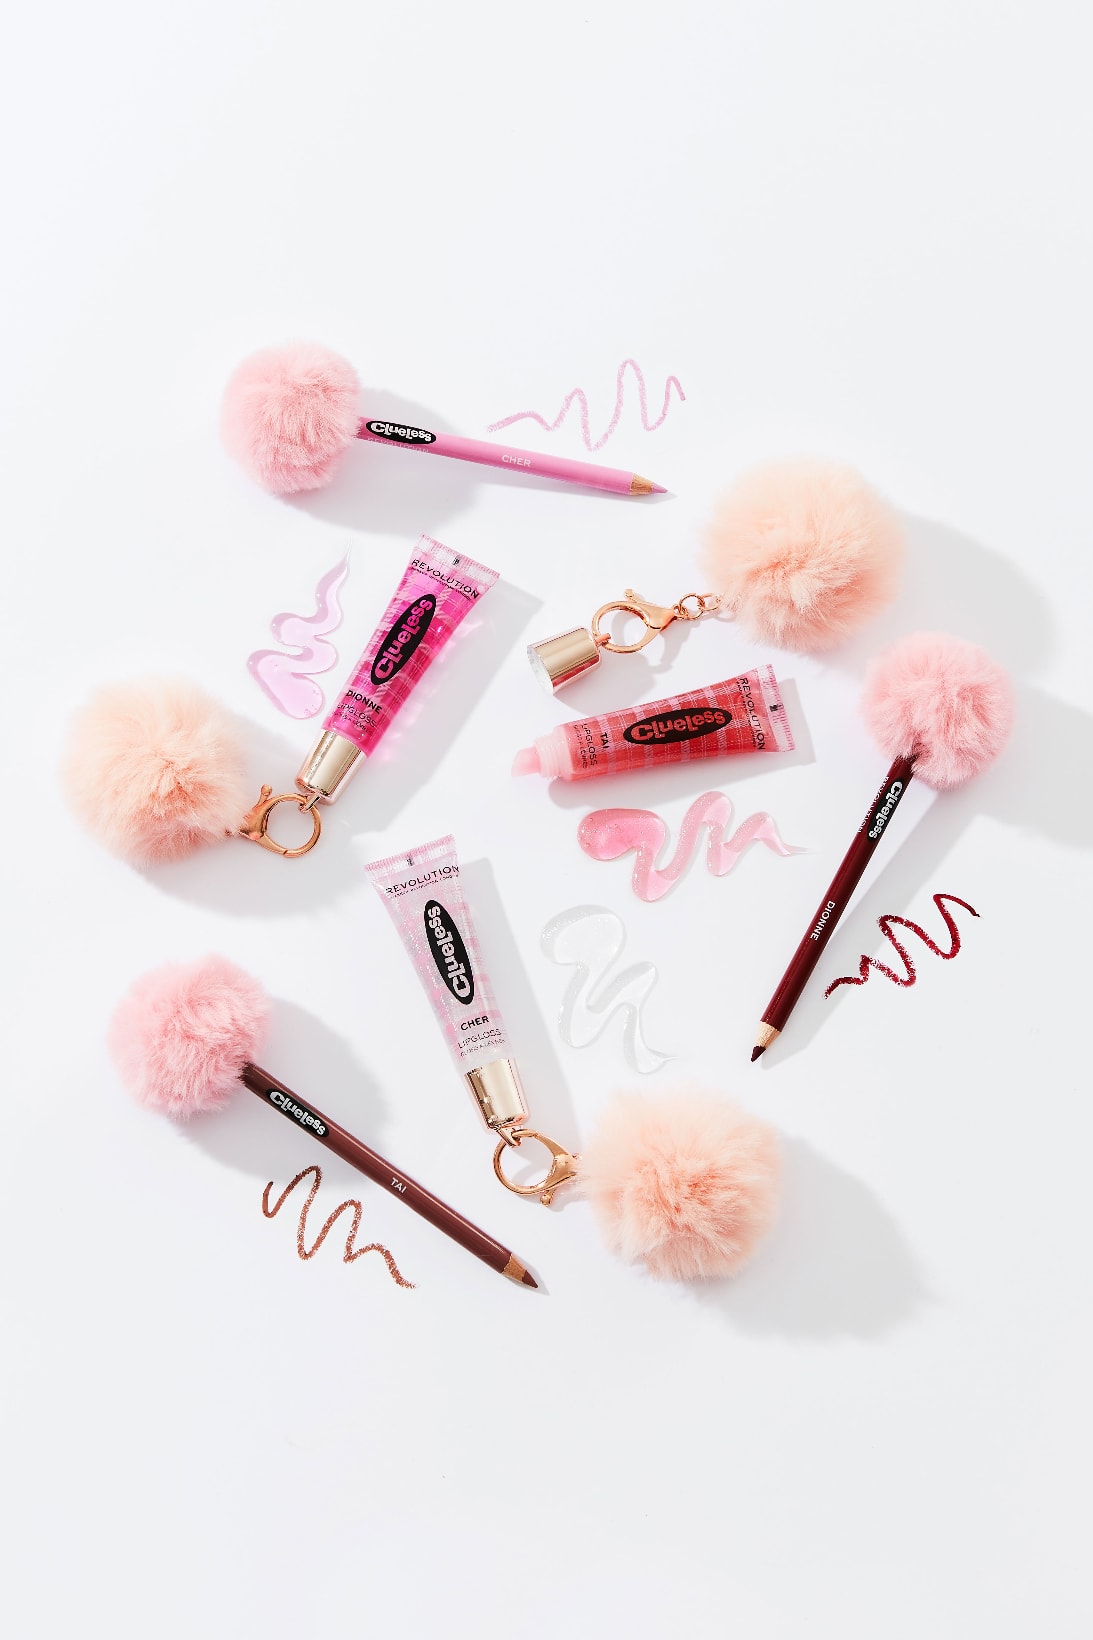 Make up Revolution x Clueless Collection Eyeshadow Lipgloss Eyeliner Release